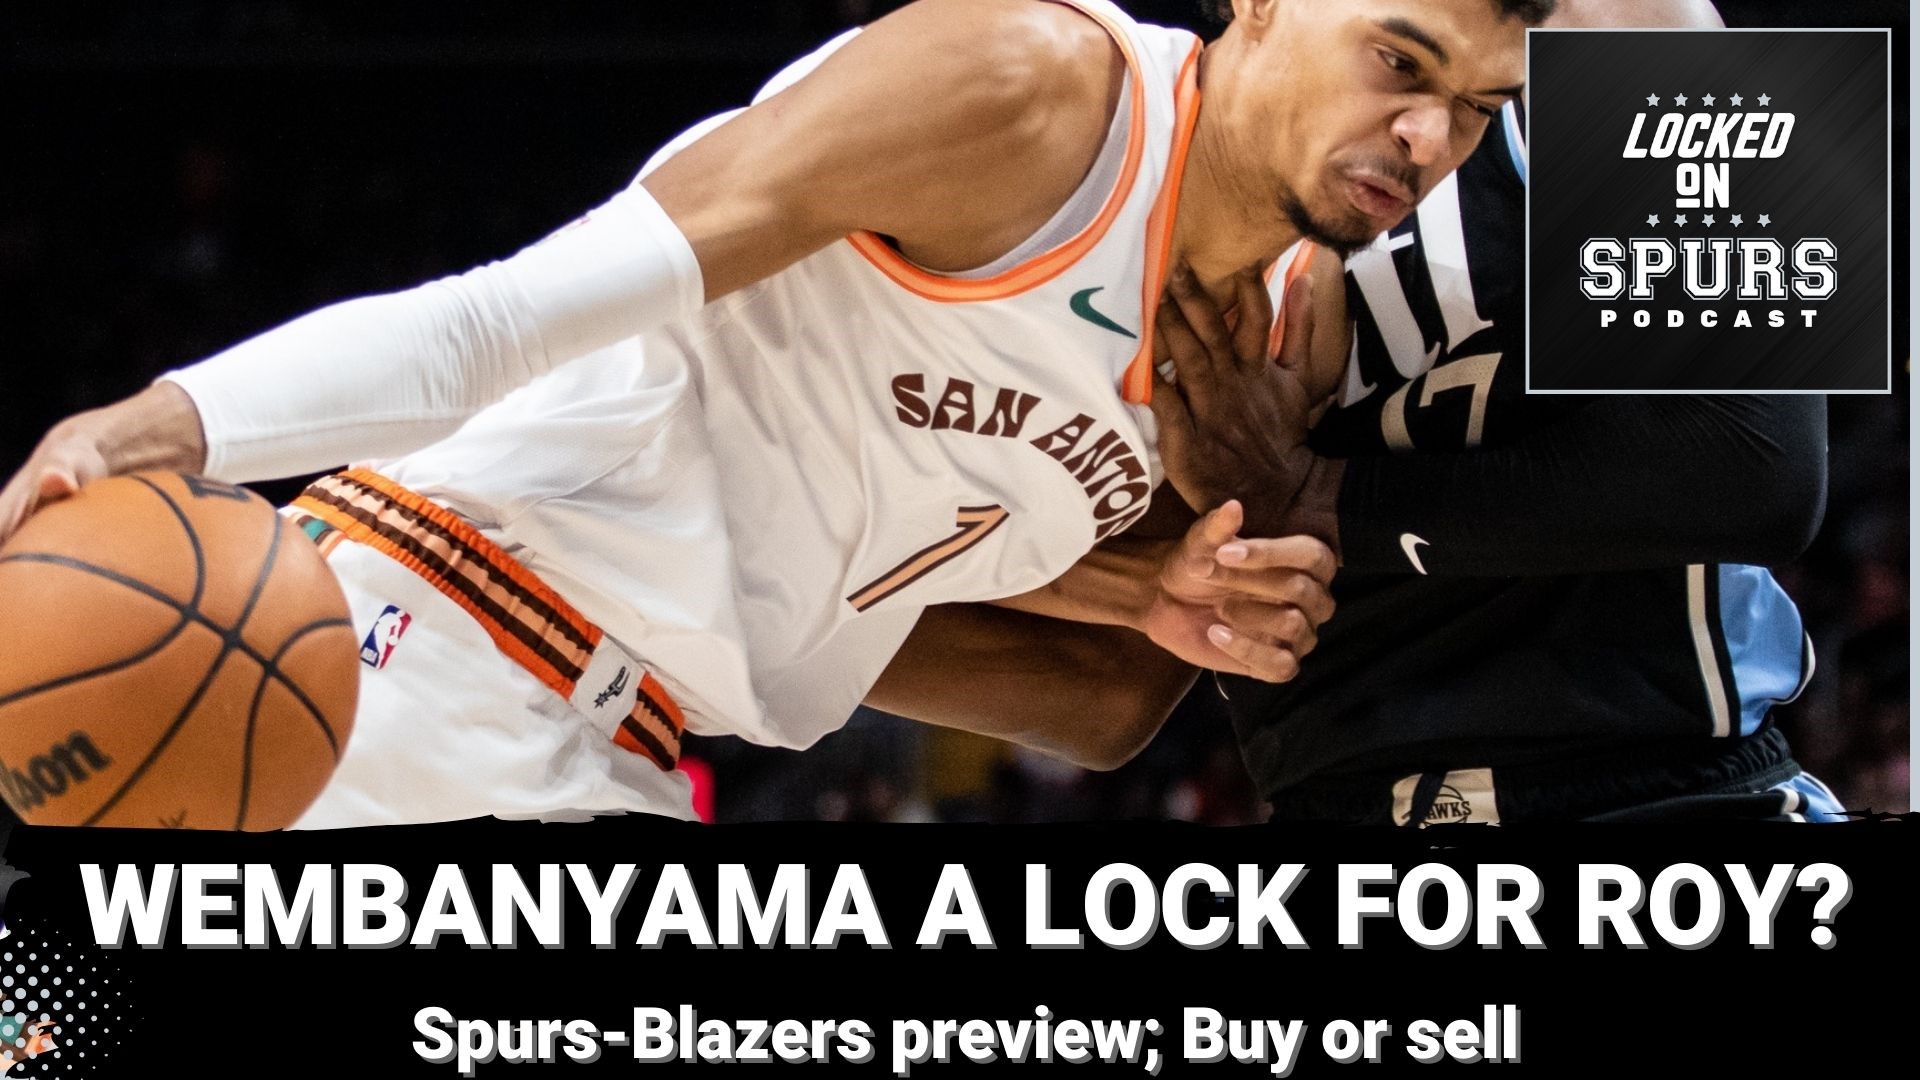 Also, a quick Spurs-Blazers preview.